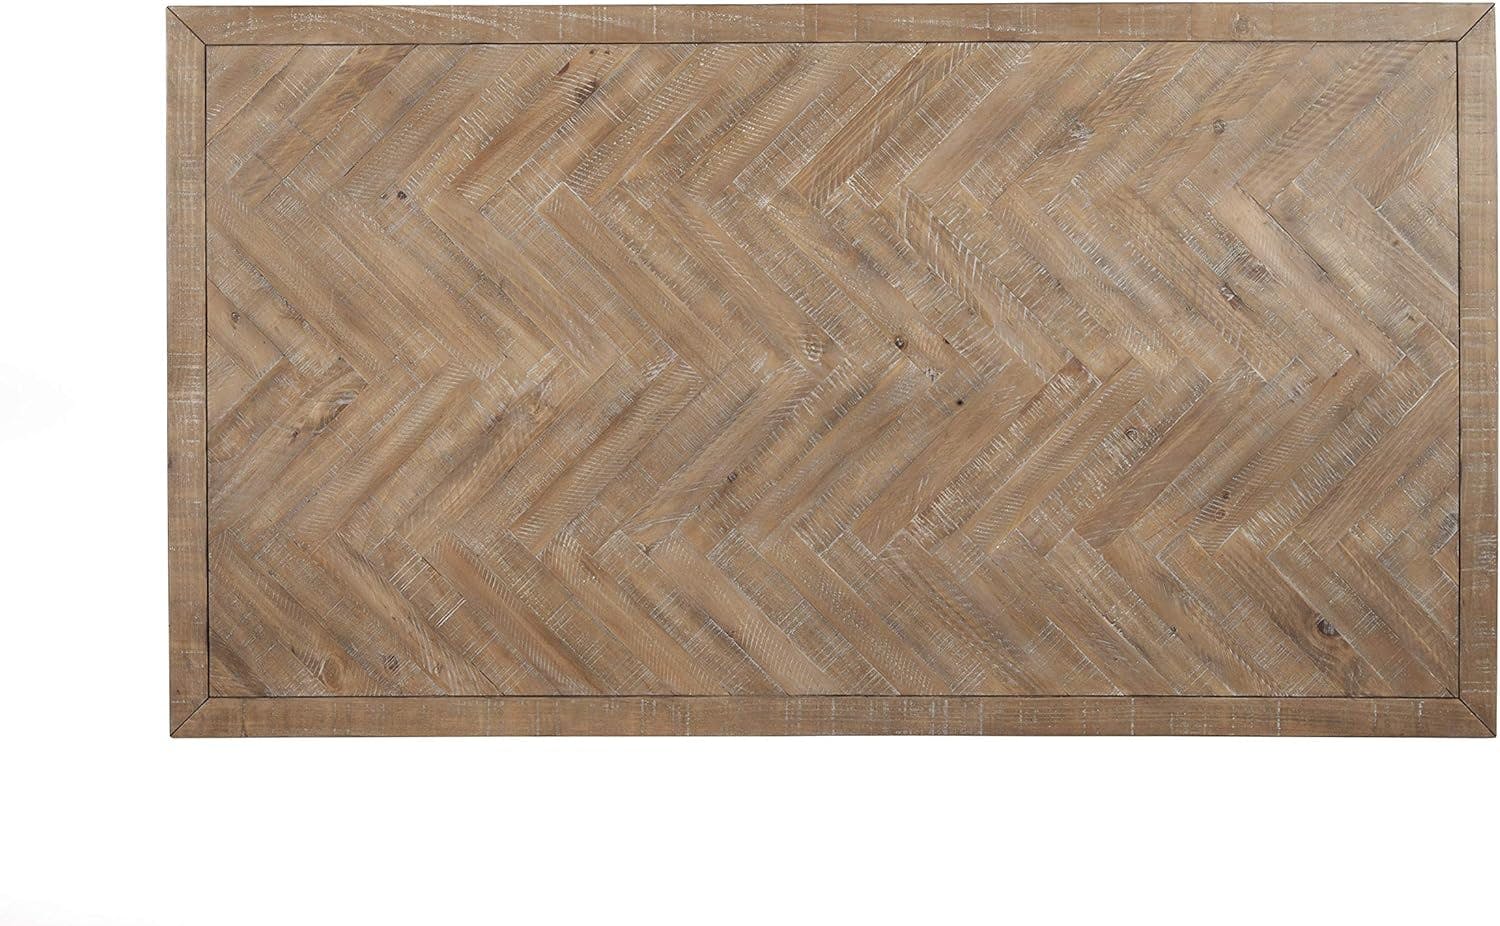 Reclaimed Pine Chevron 74" Rustic Dining Table in Weathered Natural